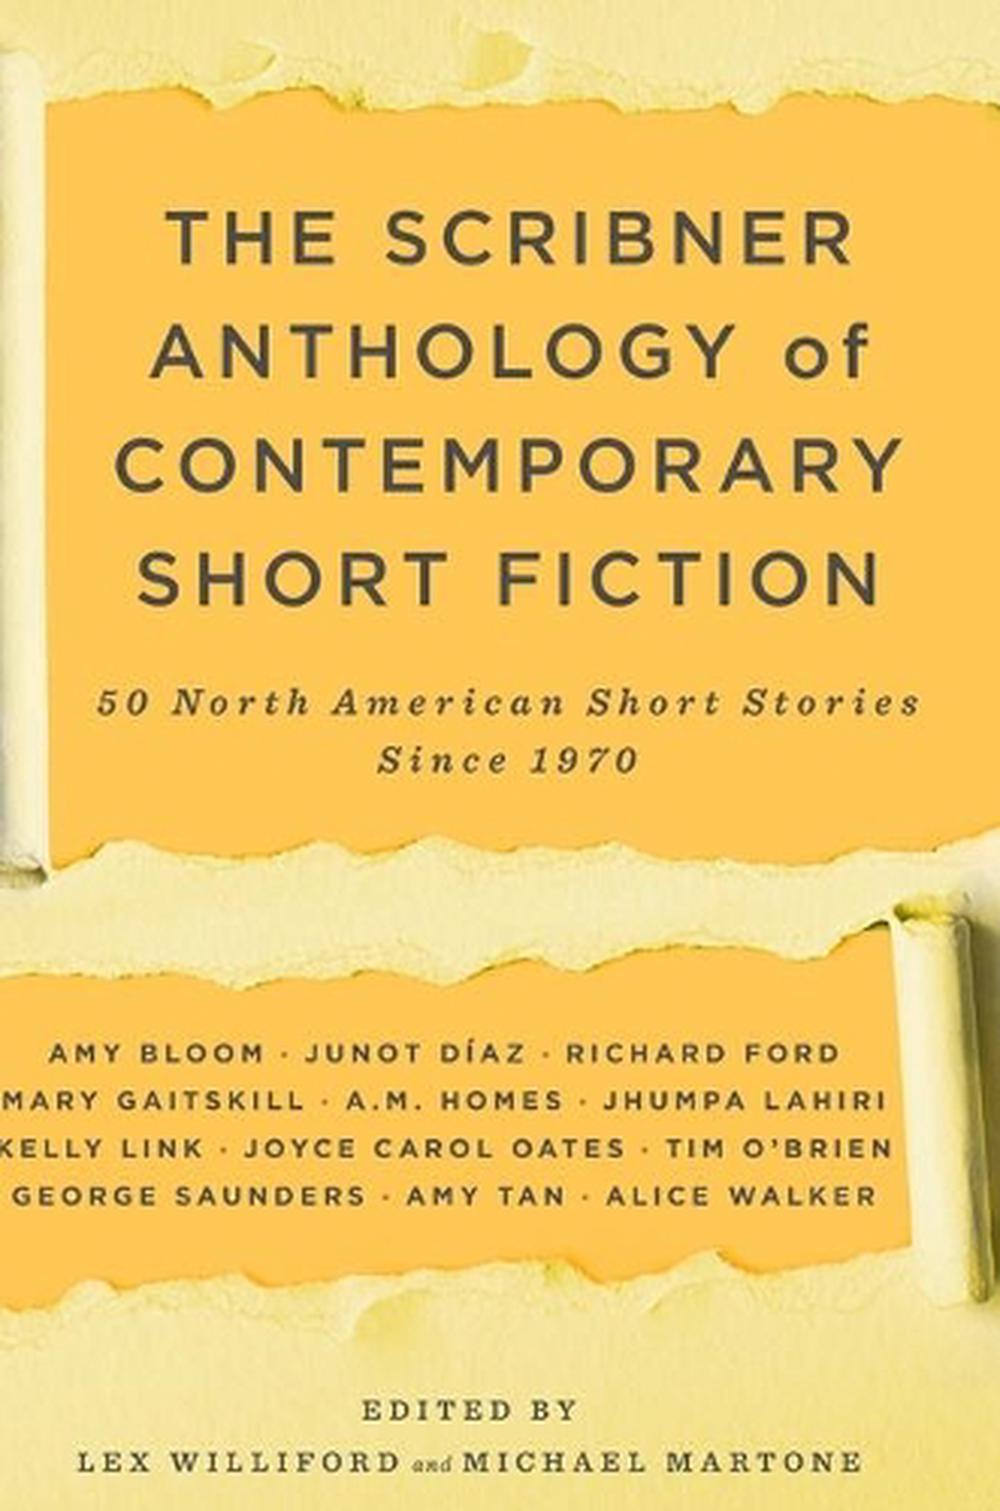 The Scribner Anthology of Contemporary Short Fiction 50 North American